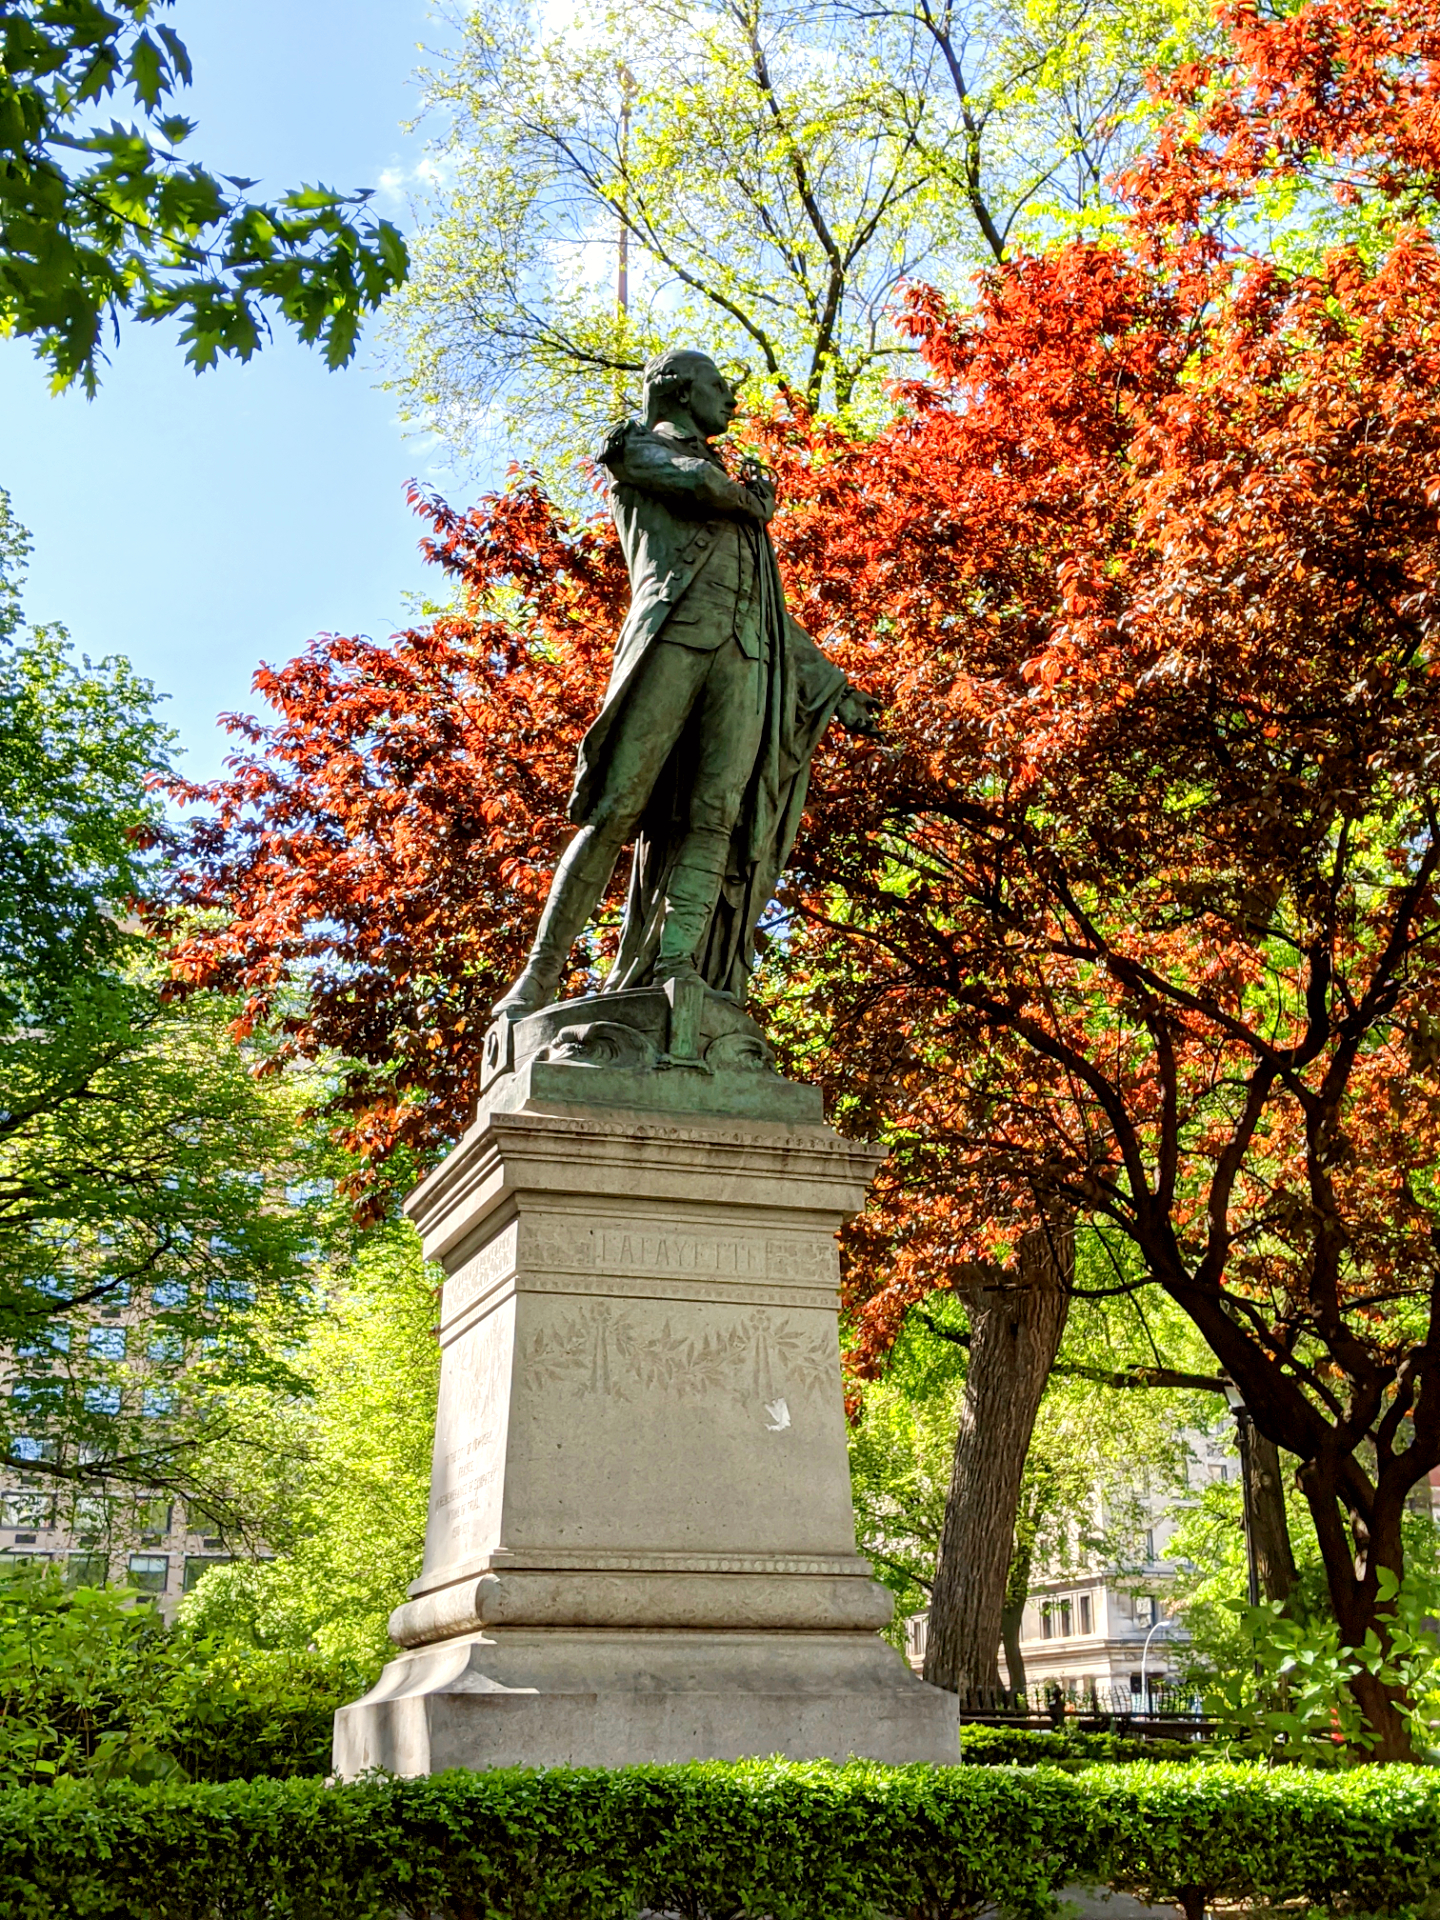 Sculpture of Lafayette by Bartholdi in Union Square Park